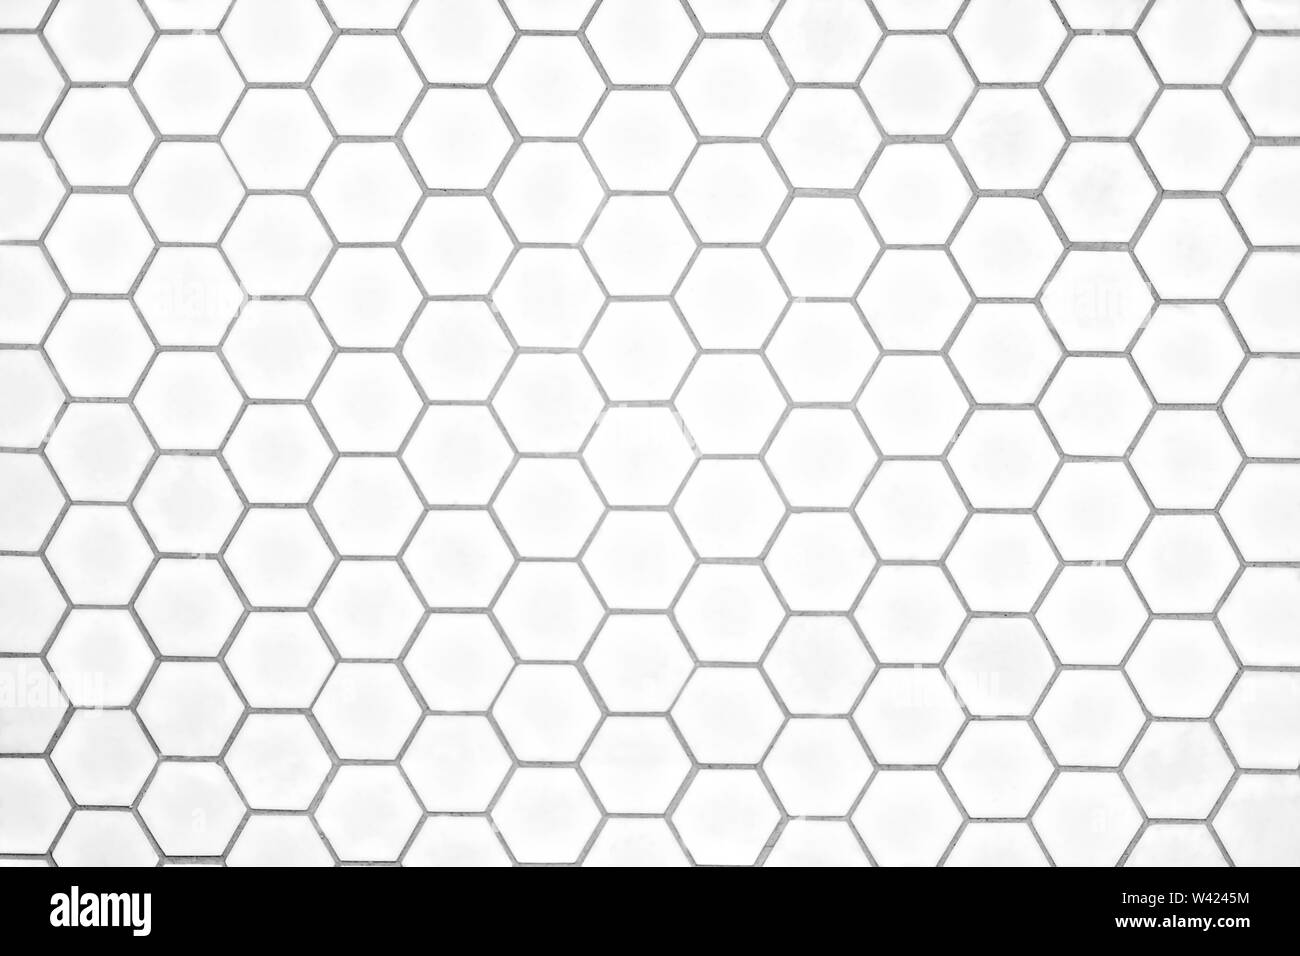 Honeycomb Pattern From Bees Like A Ceiling Or Wall With Shape Of